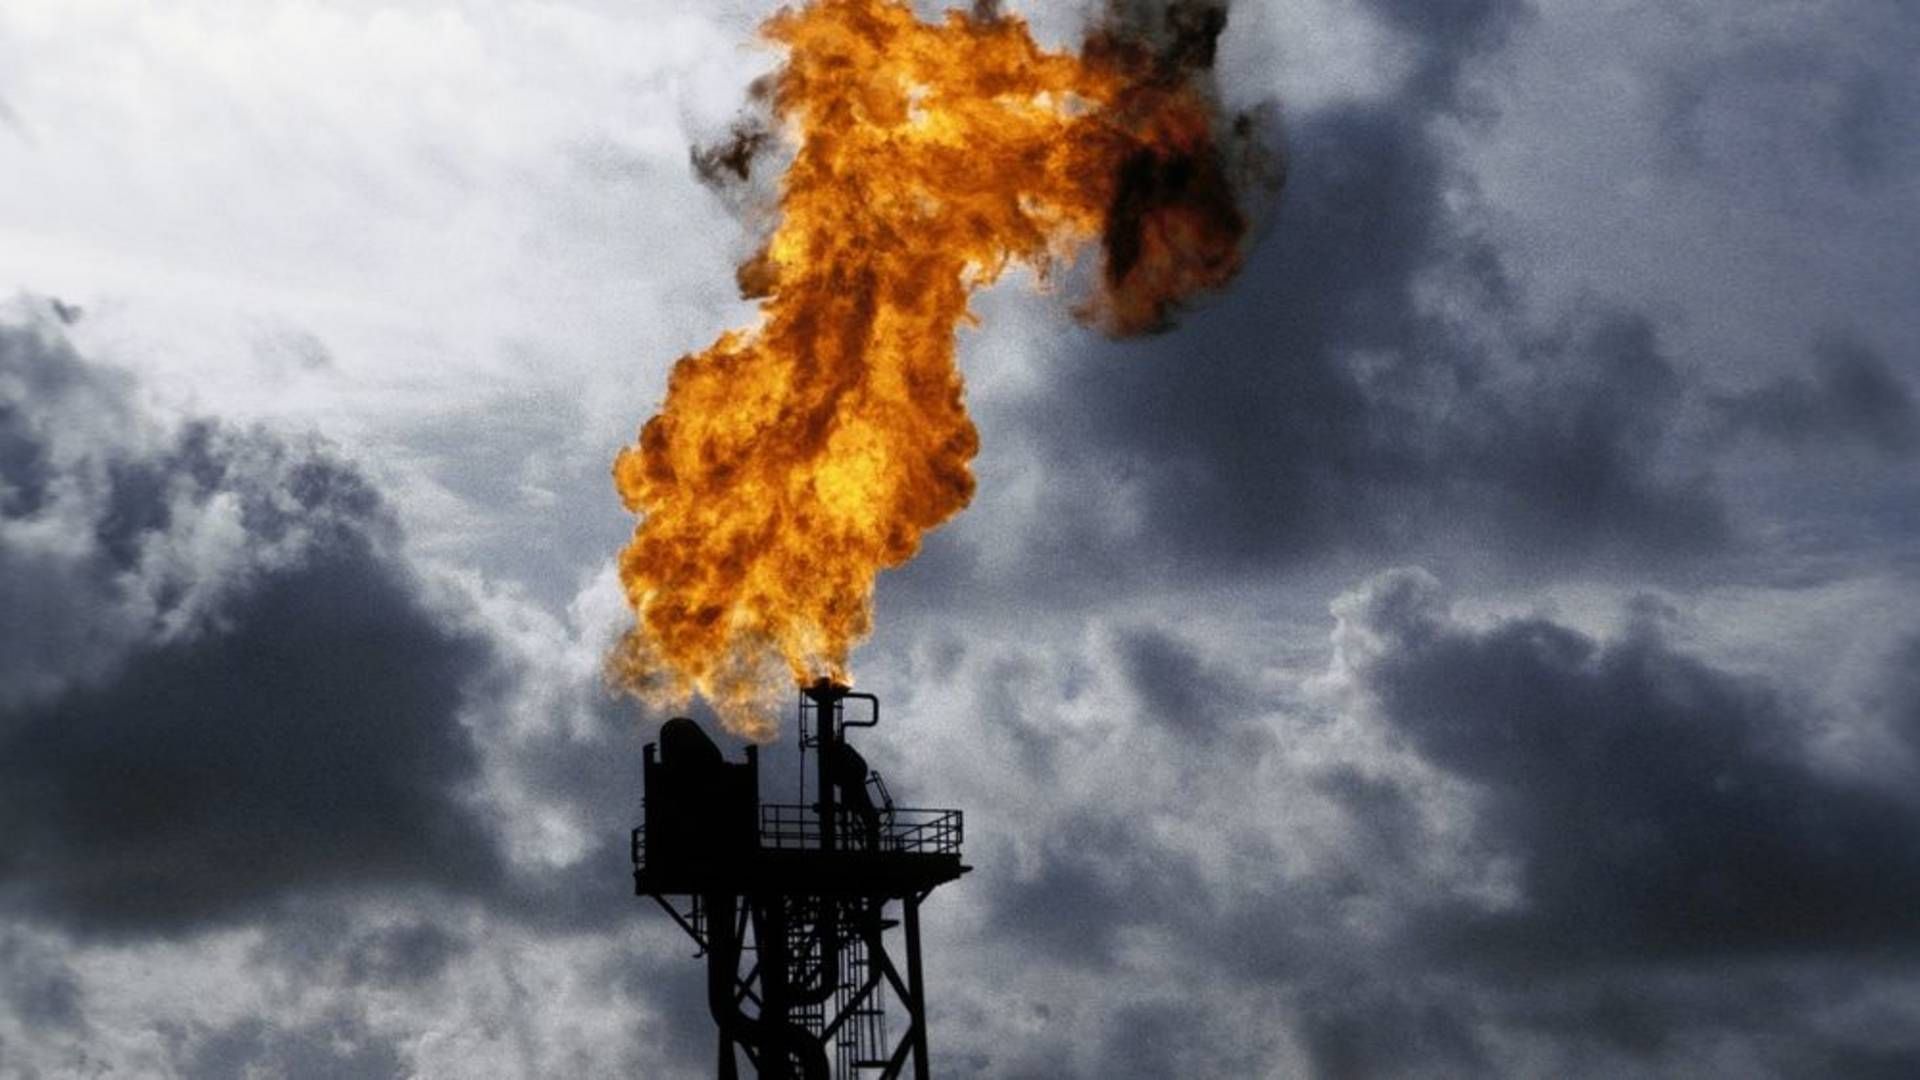 Much of Arizona's natural gas ends up in flames via flaring, but now Haldow Topsøe has plans to utilize the gas for the transport sector. | Photo: Finn Frandsen/Politiken/Ritzau Scanpix